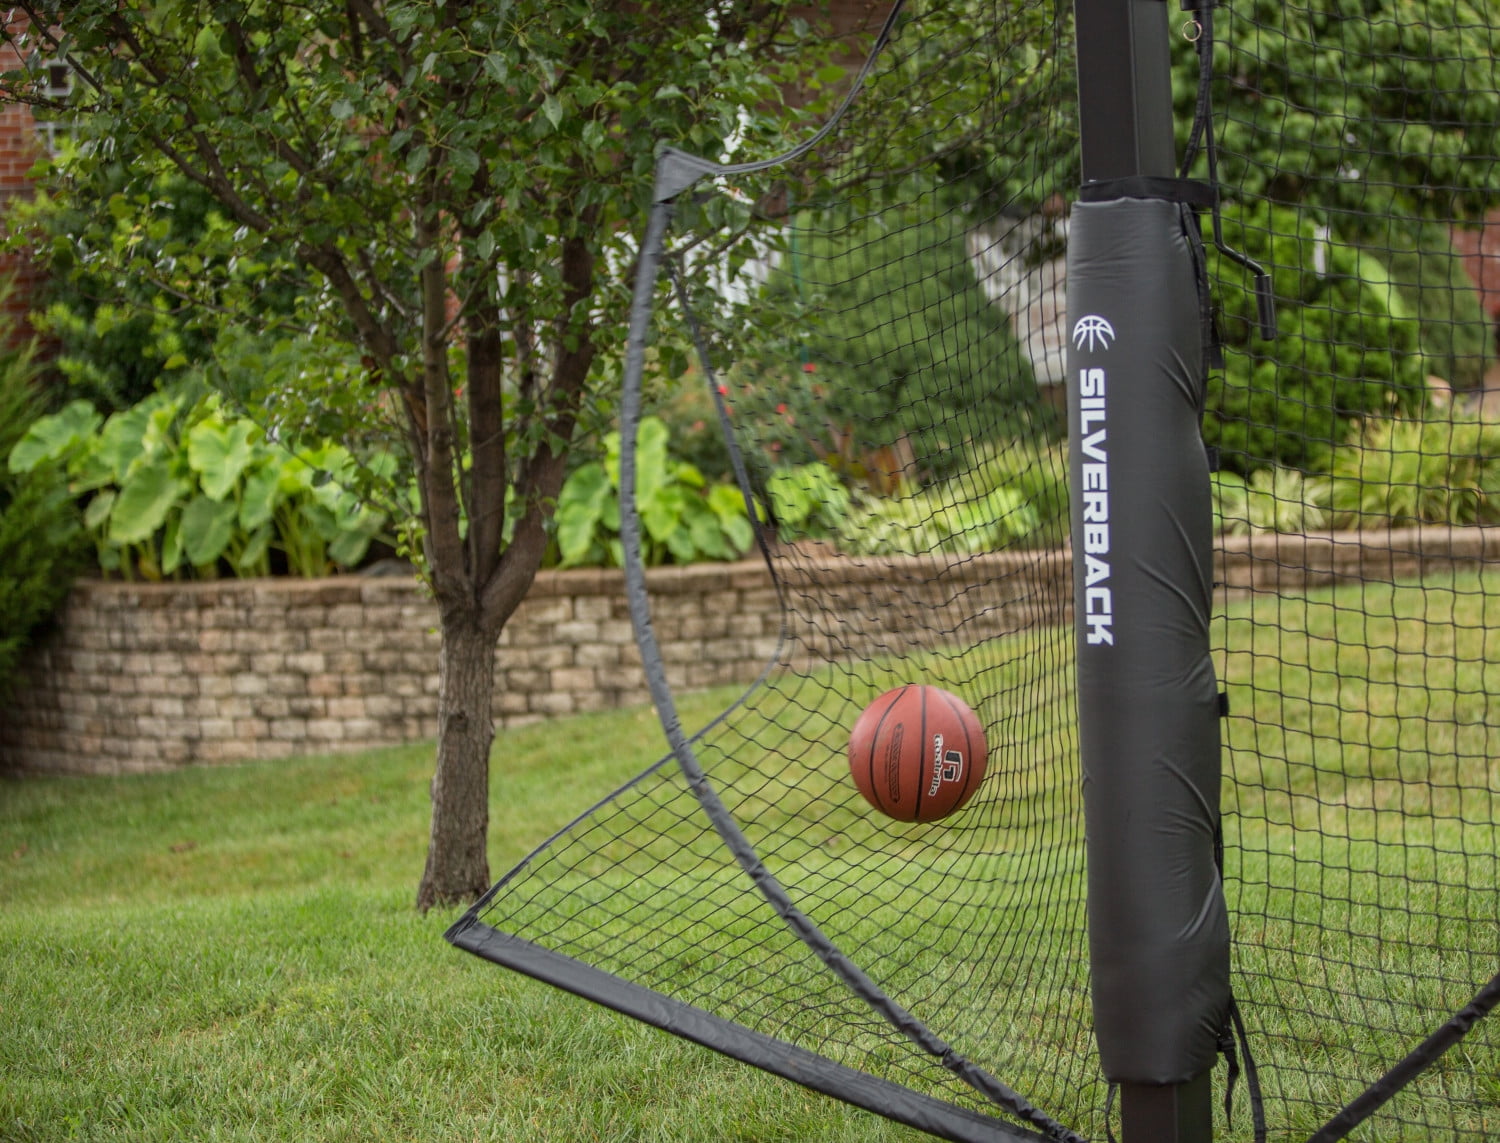 Silverback Basketball Yard Guard Defensive Net System Rebounder with Foldable 